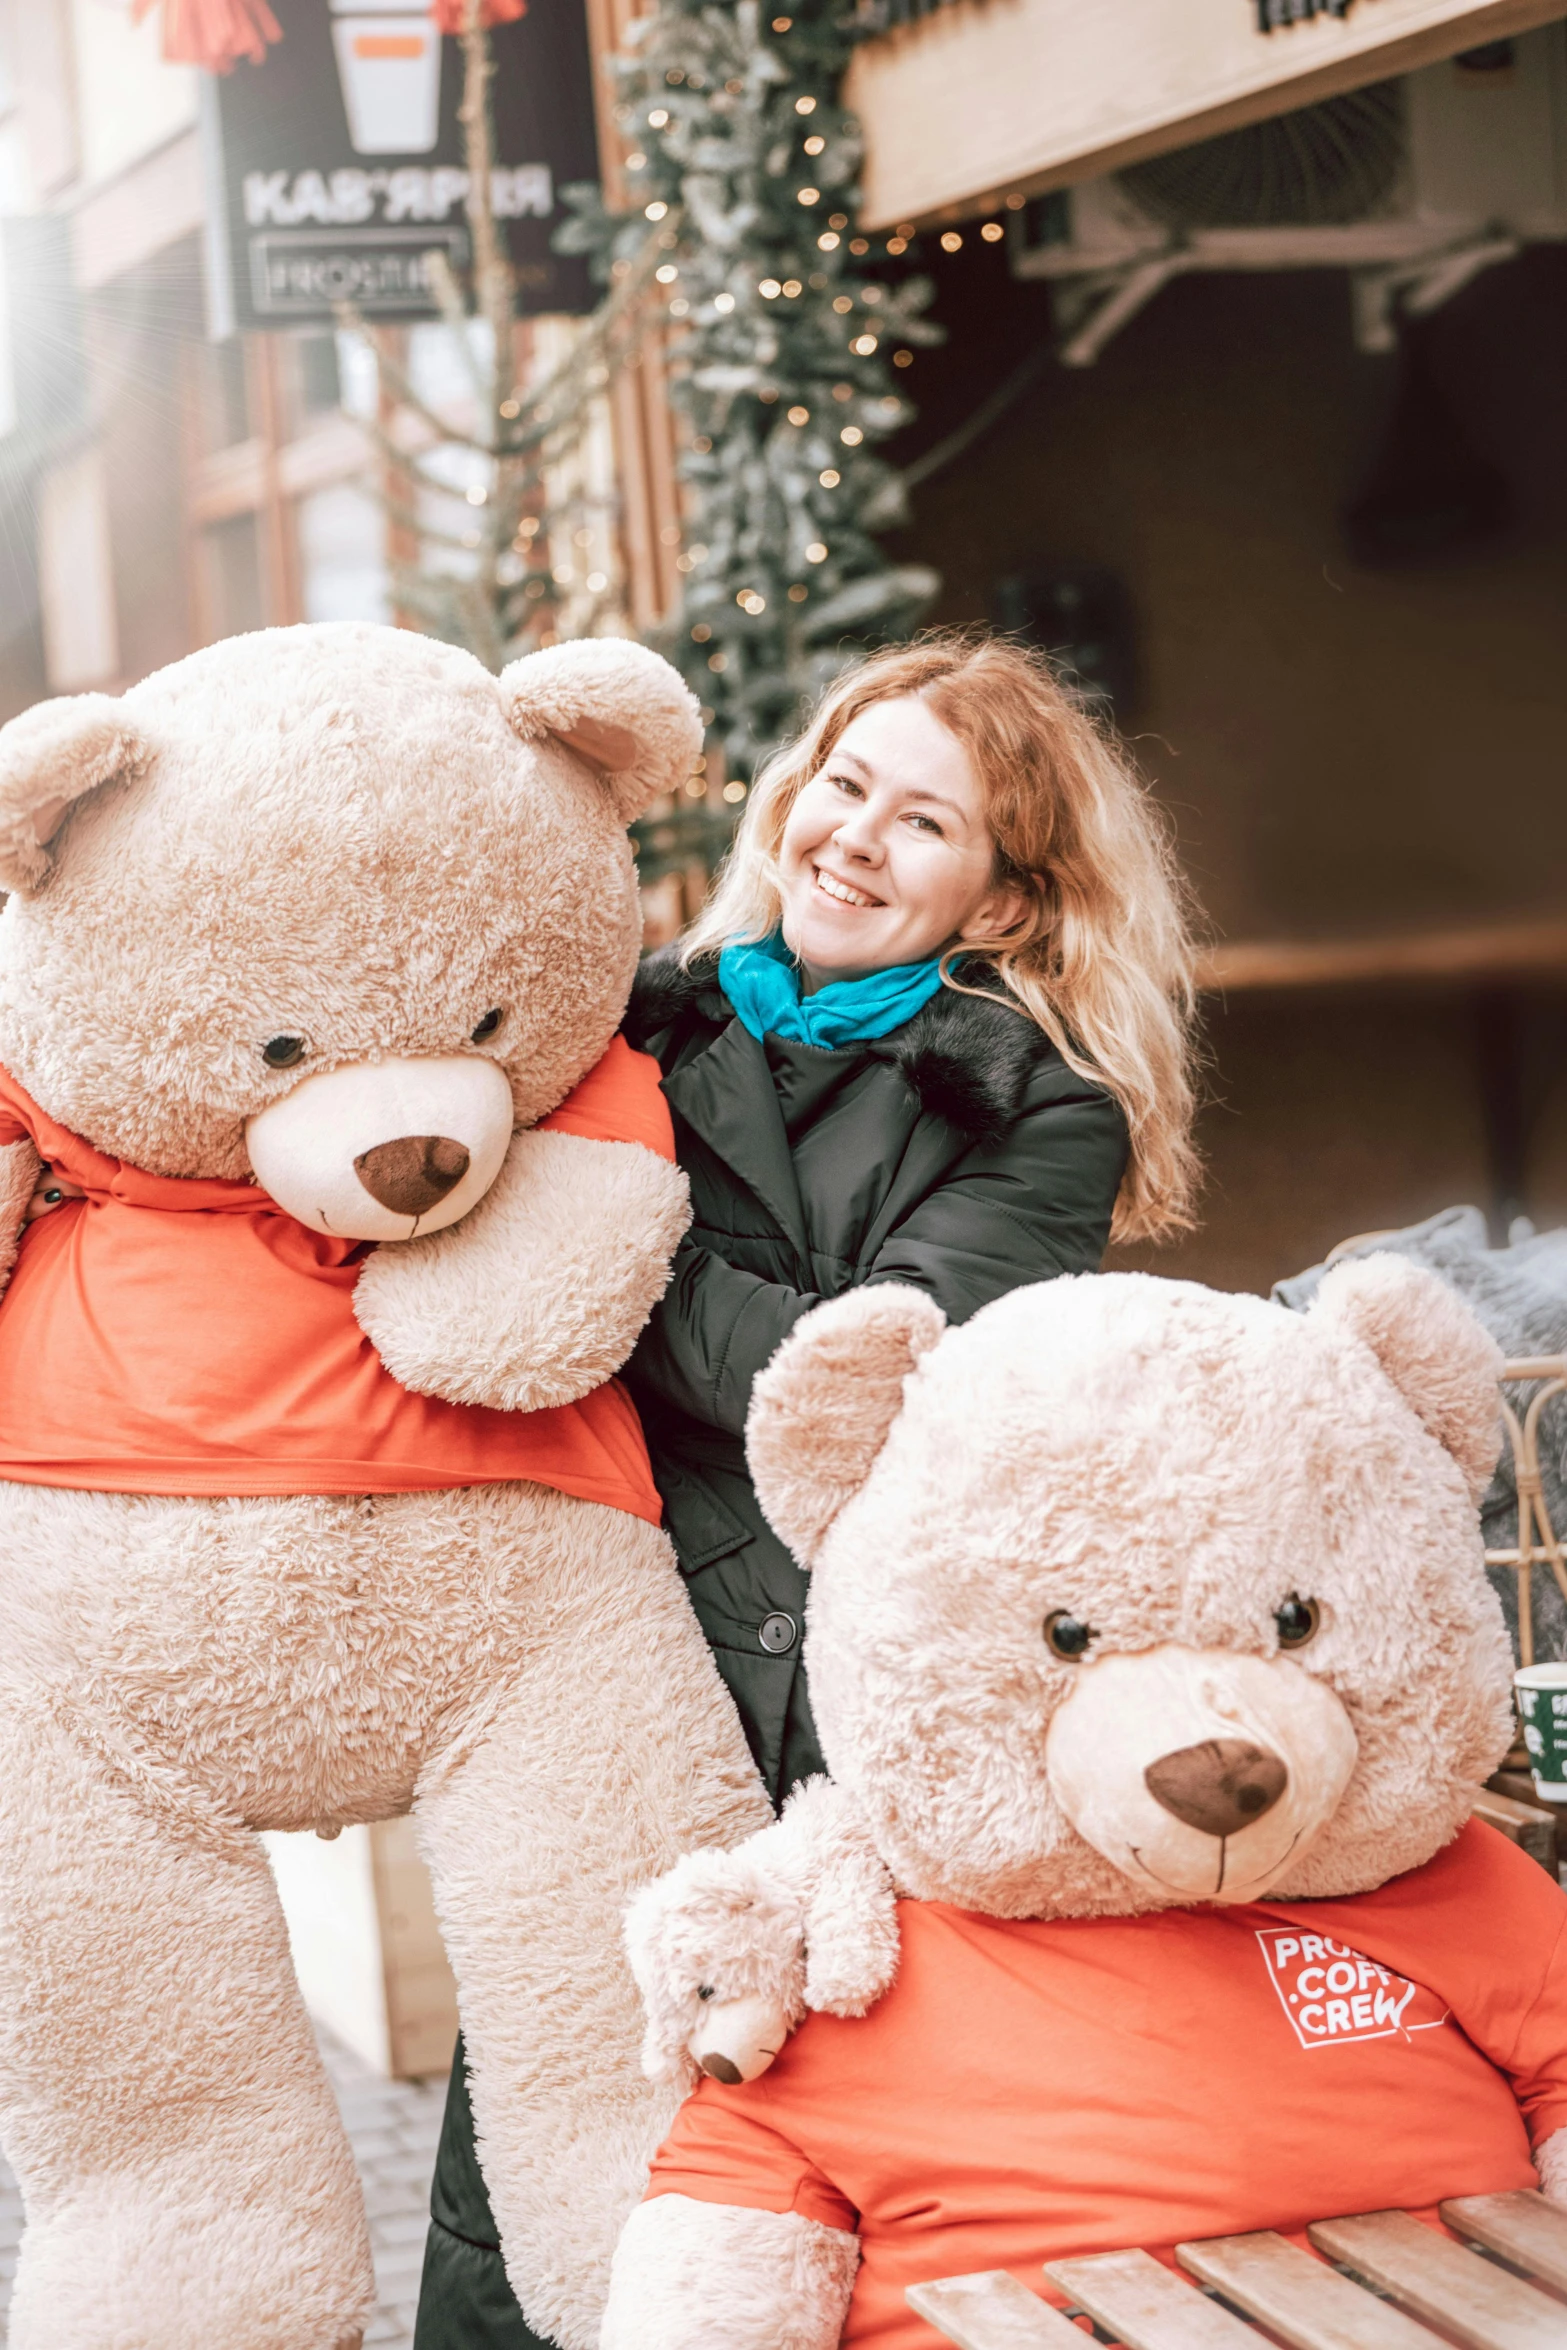 a woman standing next to a giant teddy bear, by Julia Pishtar, pexels contest winner, giving gifts to people, cute details, four humanoid bears, winter setting